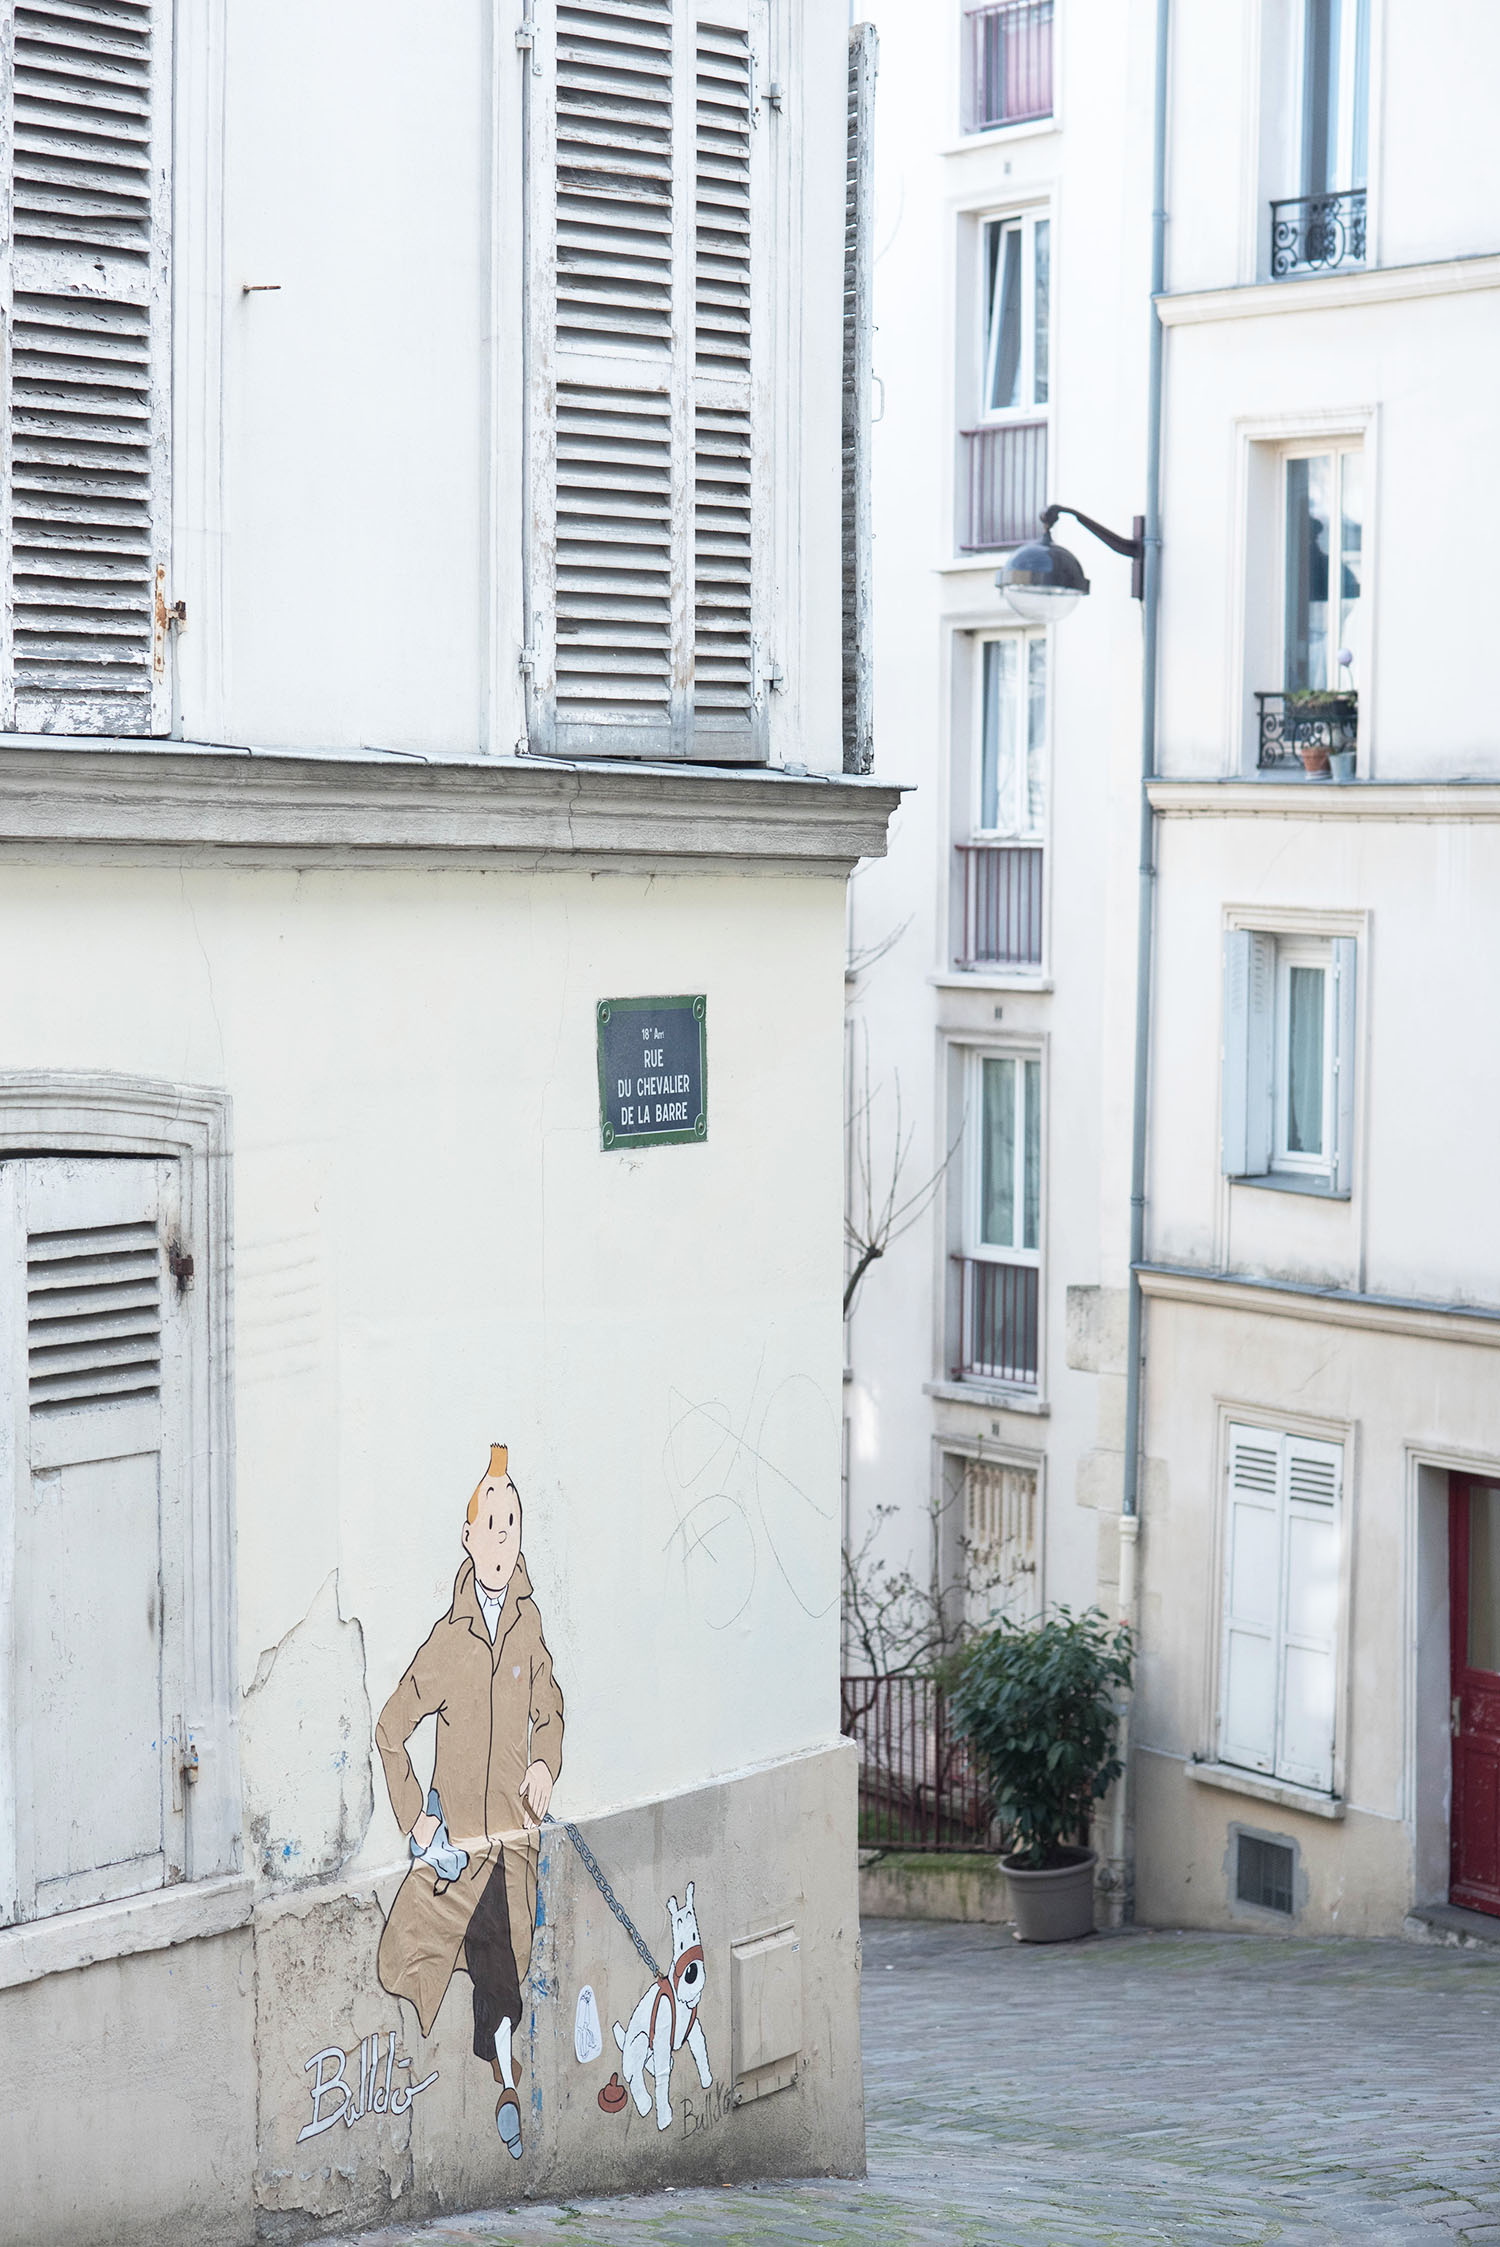 Tintin graffiti on the streets of Montmartre in Paris, as captured by travel blogger Cee Fardoe of Coco & Vera